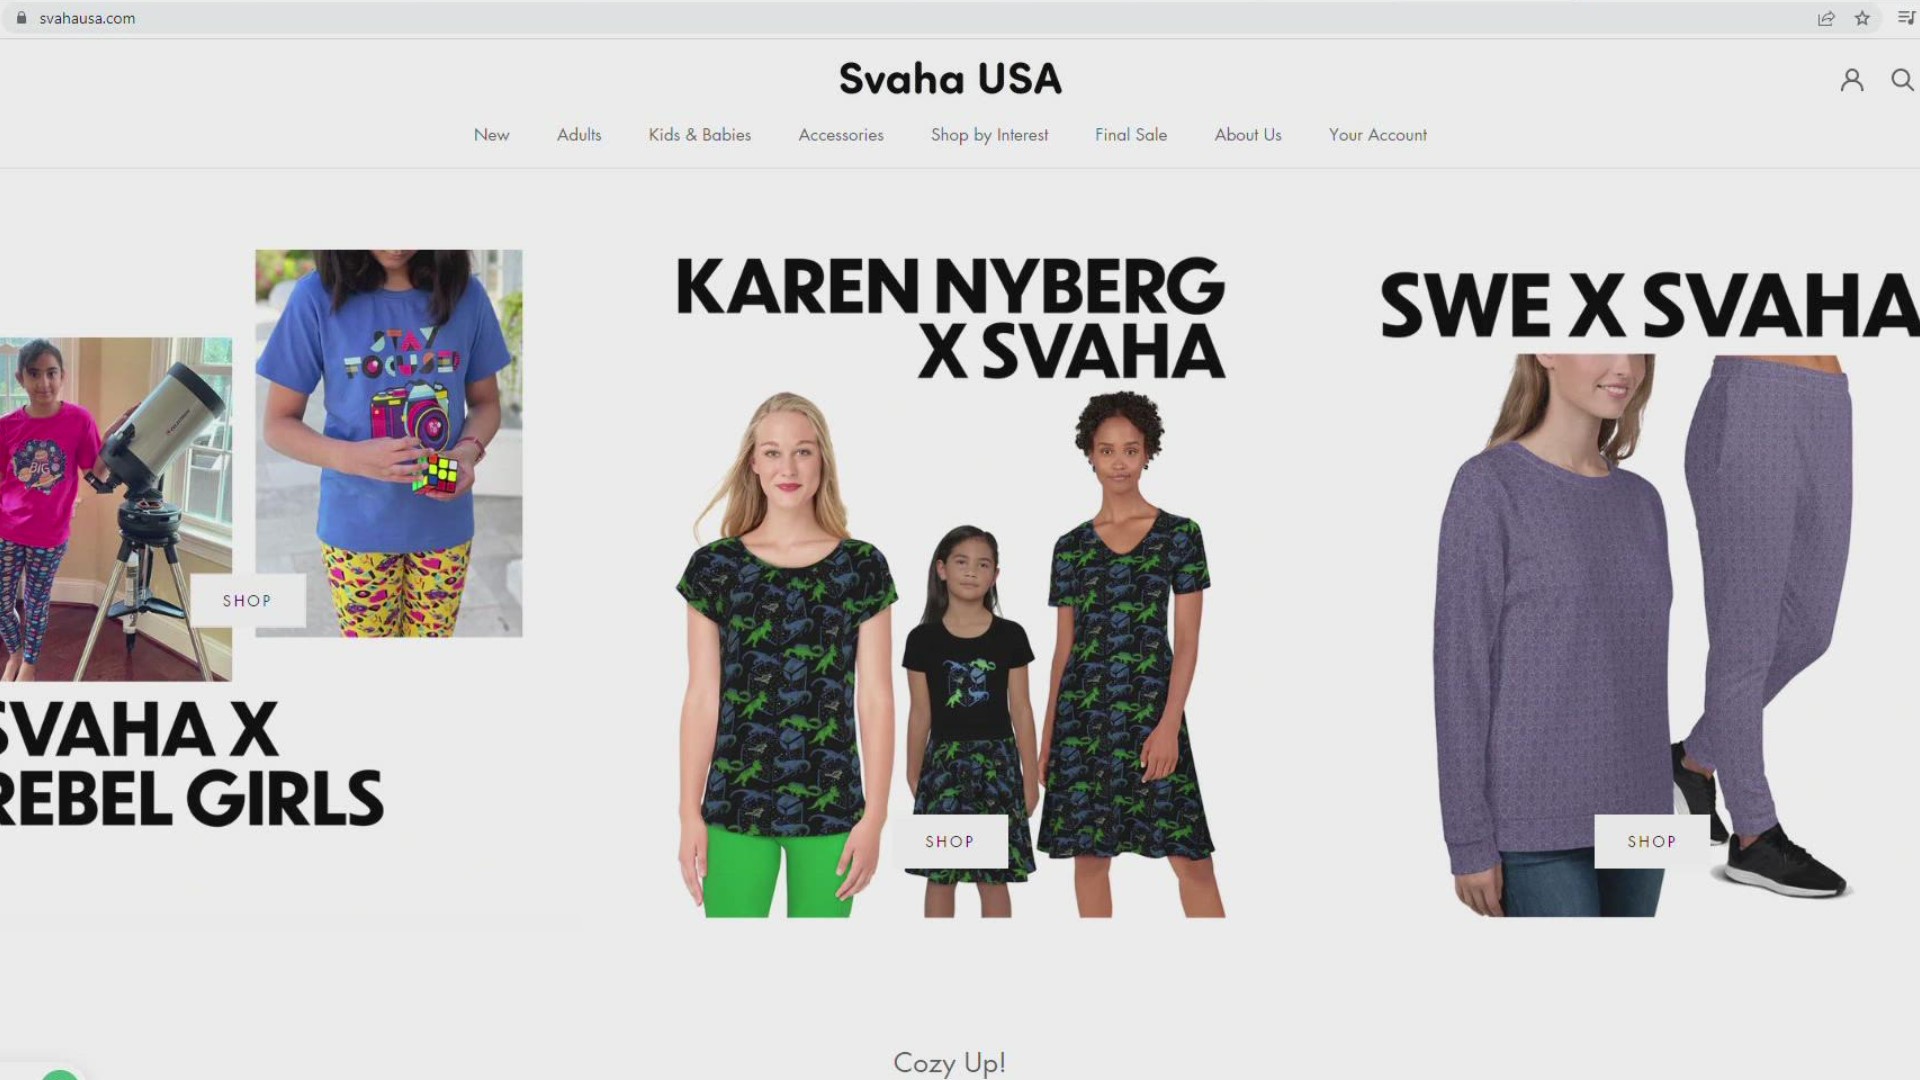 Svaha CEO Jaya Iyer launched her company in D.C. in 2015, after she was unable to find rocket scientist clothes for her young daughter, who wants to be an astronaut.